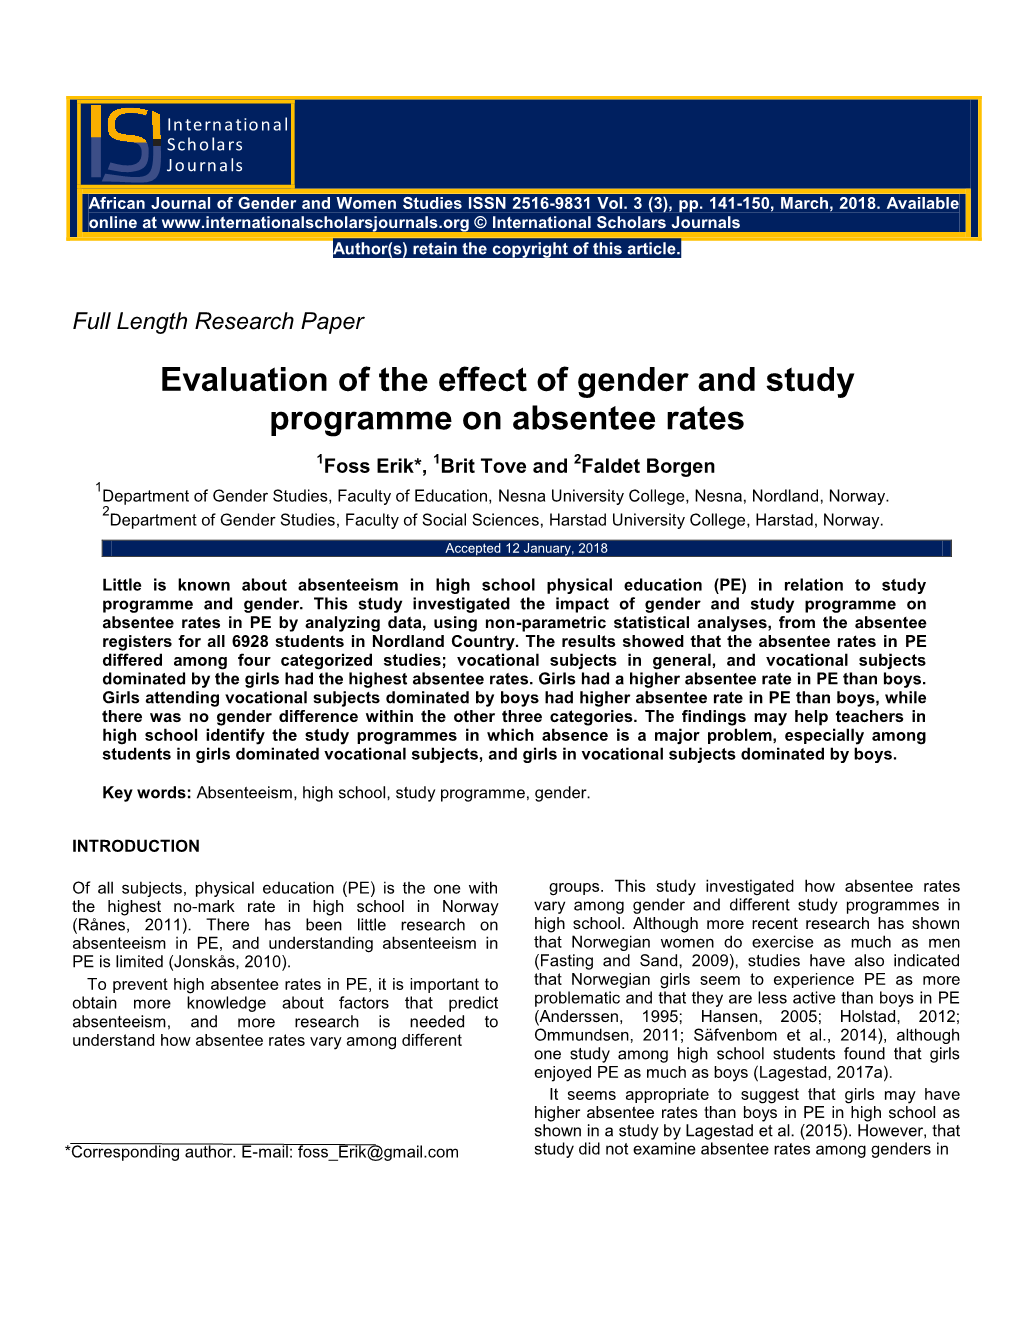 Evaluation of the Effect of Gender and Study Programme on Absentee Rates